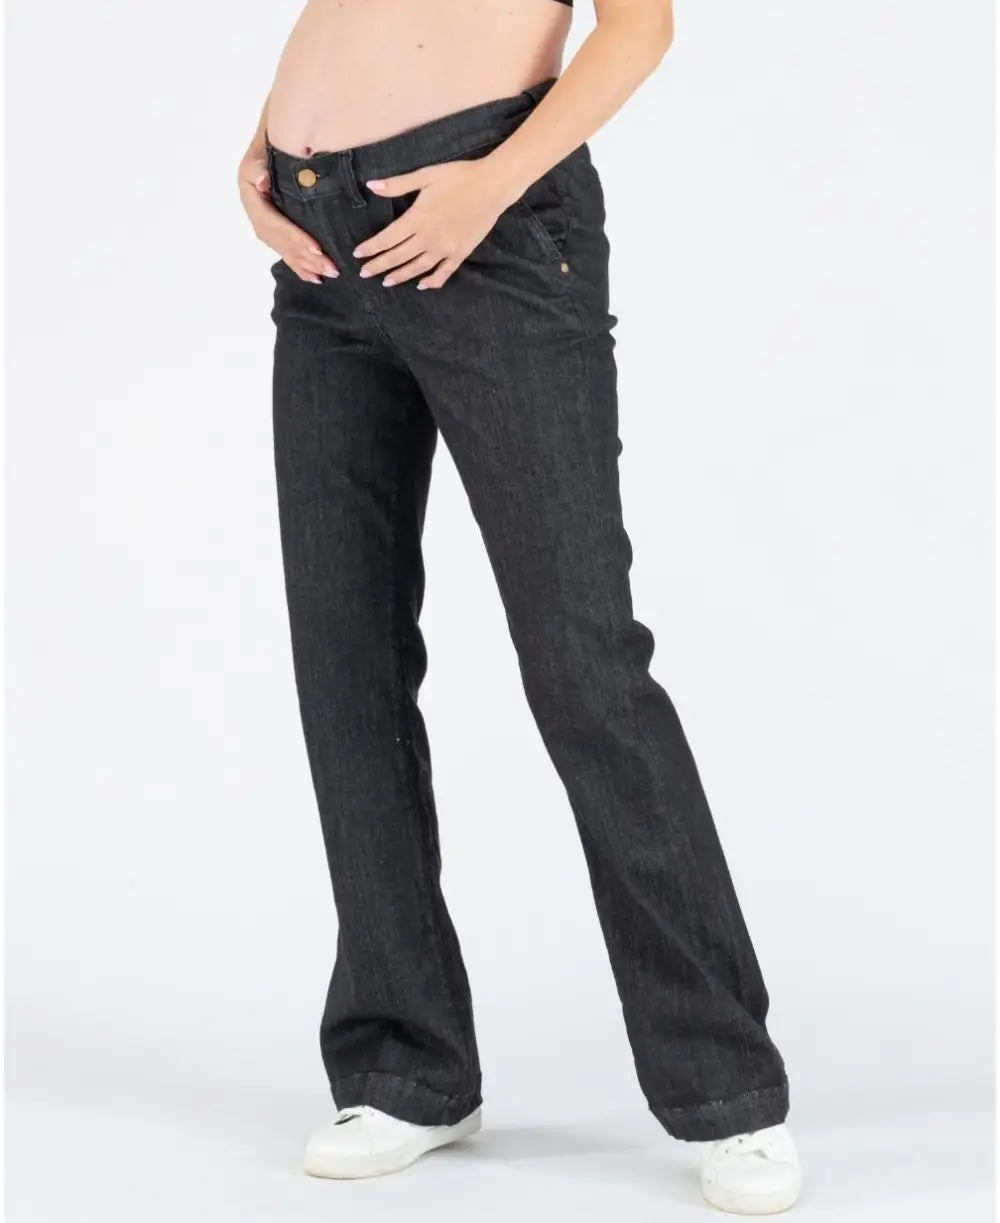 Sabrina black flare pregnancy and post partum jeans